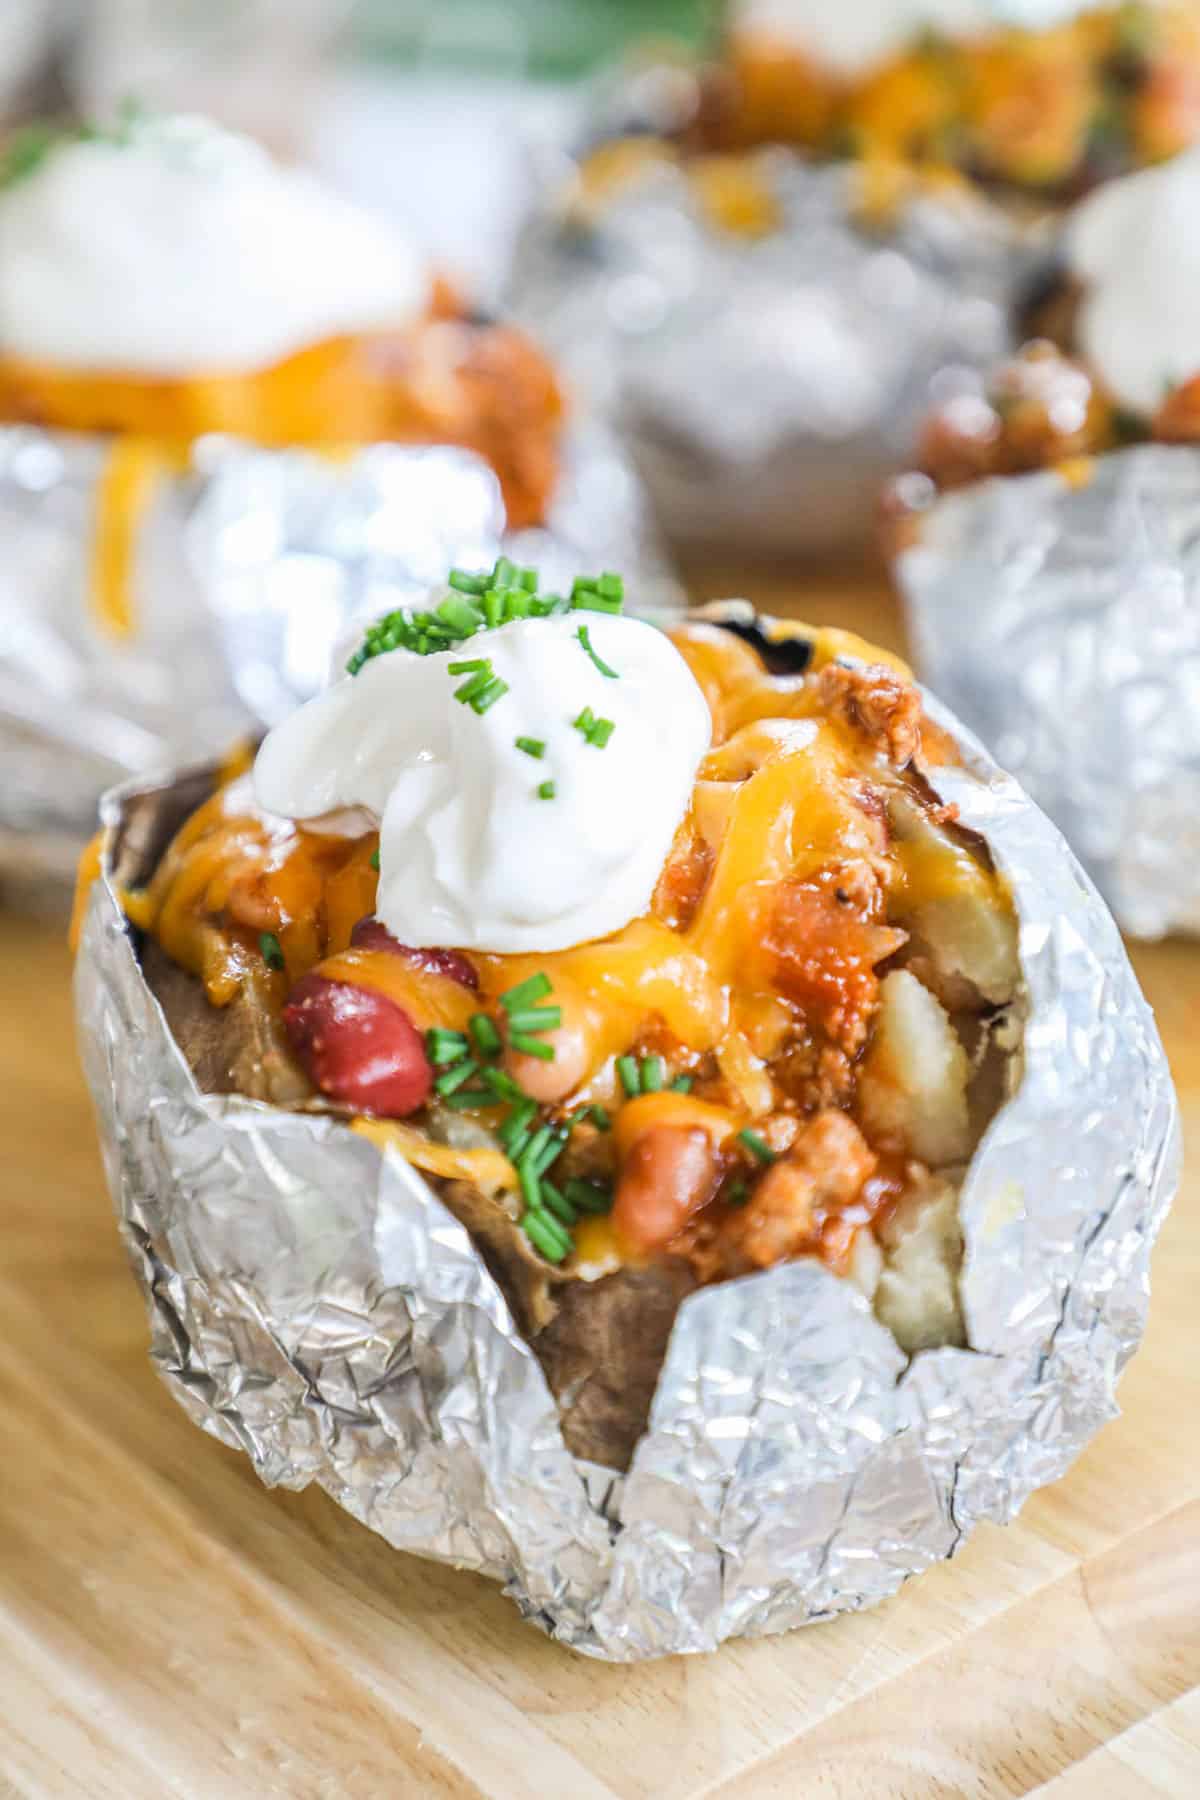 Chili stuffed baked potato wrapped in foil